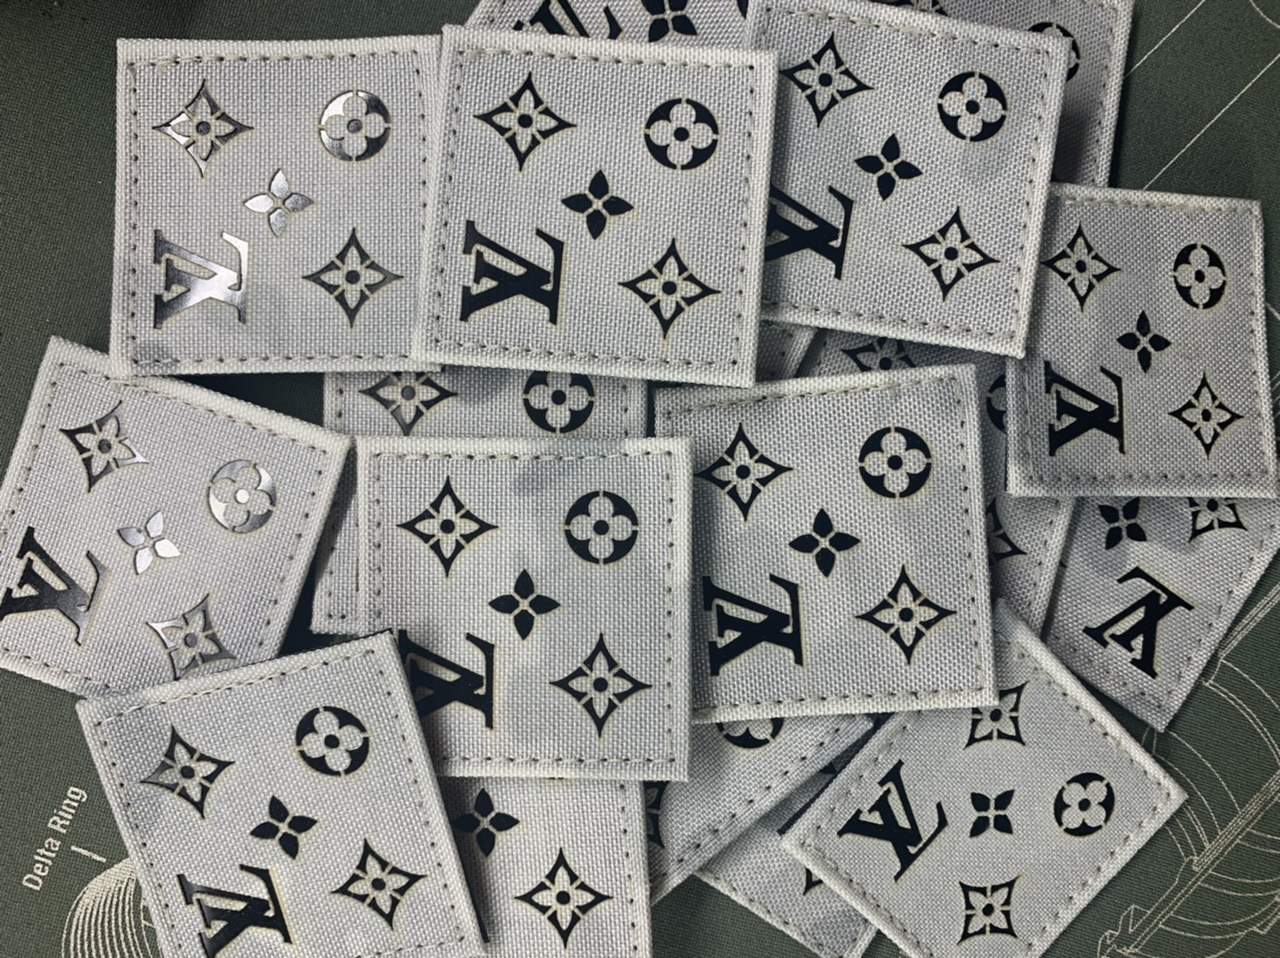 lv embroidery patch